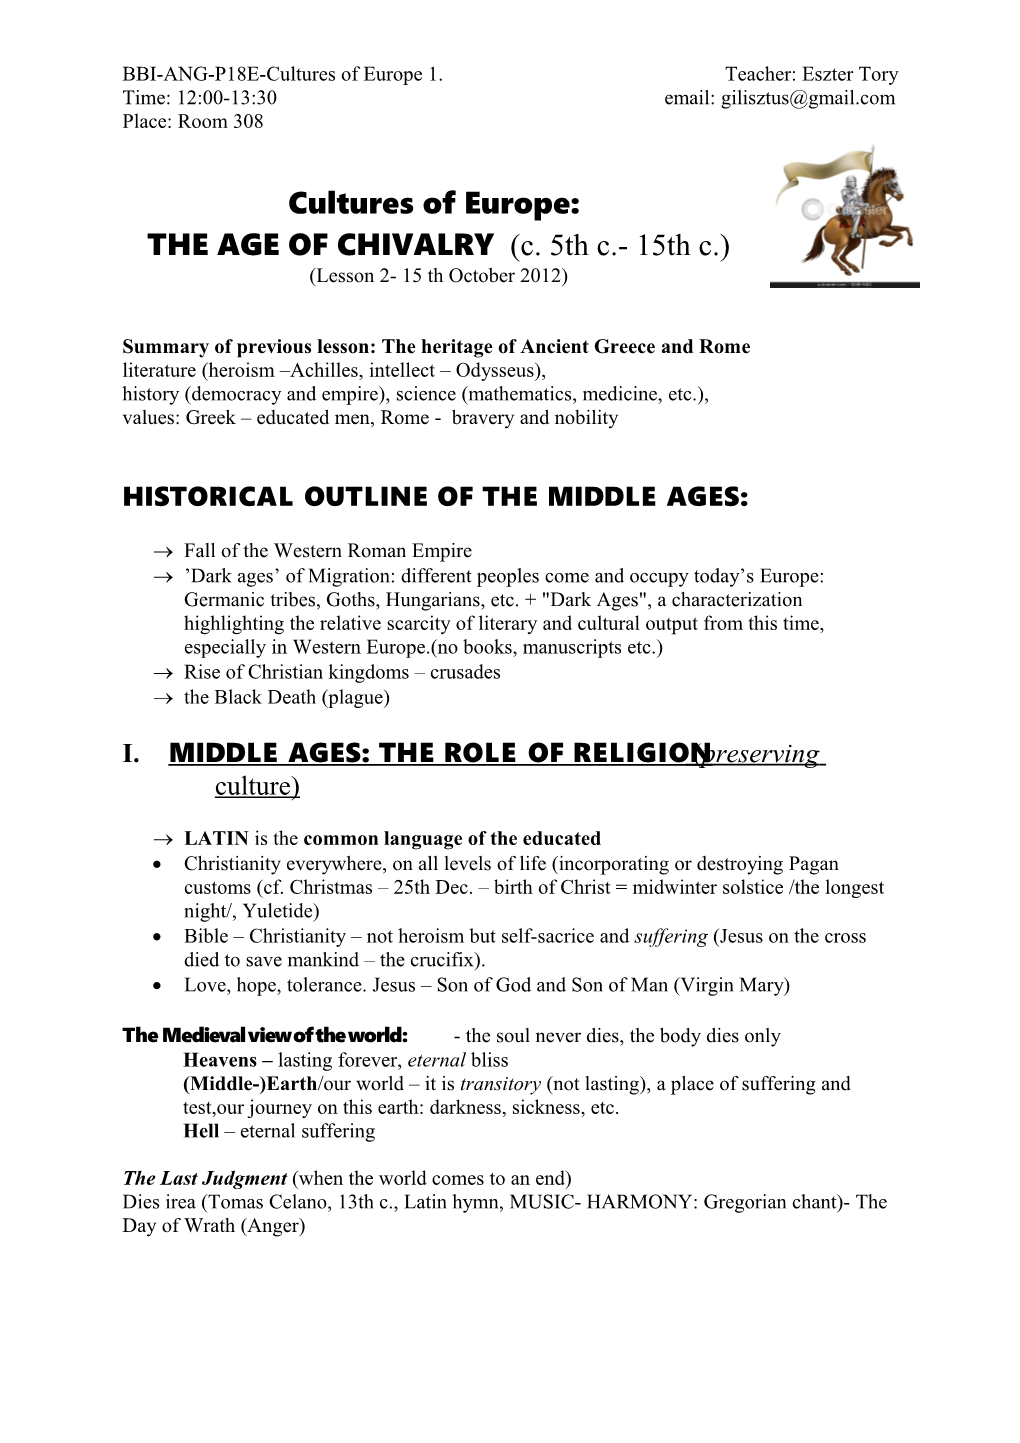 HANDOUT 2: Cultures of Europe the AGE of CHIVALRY